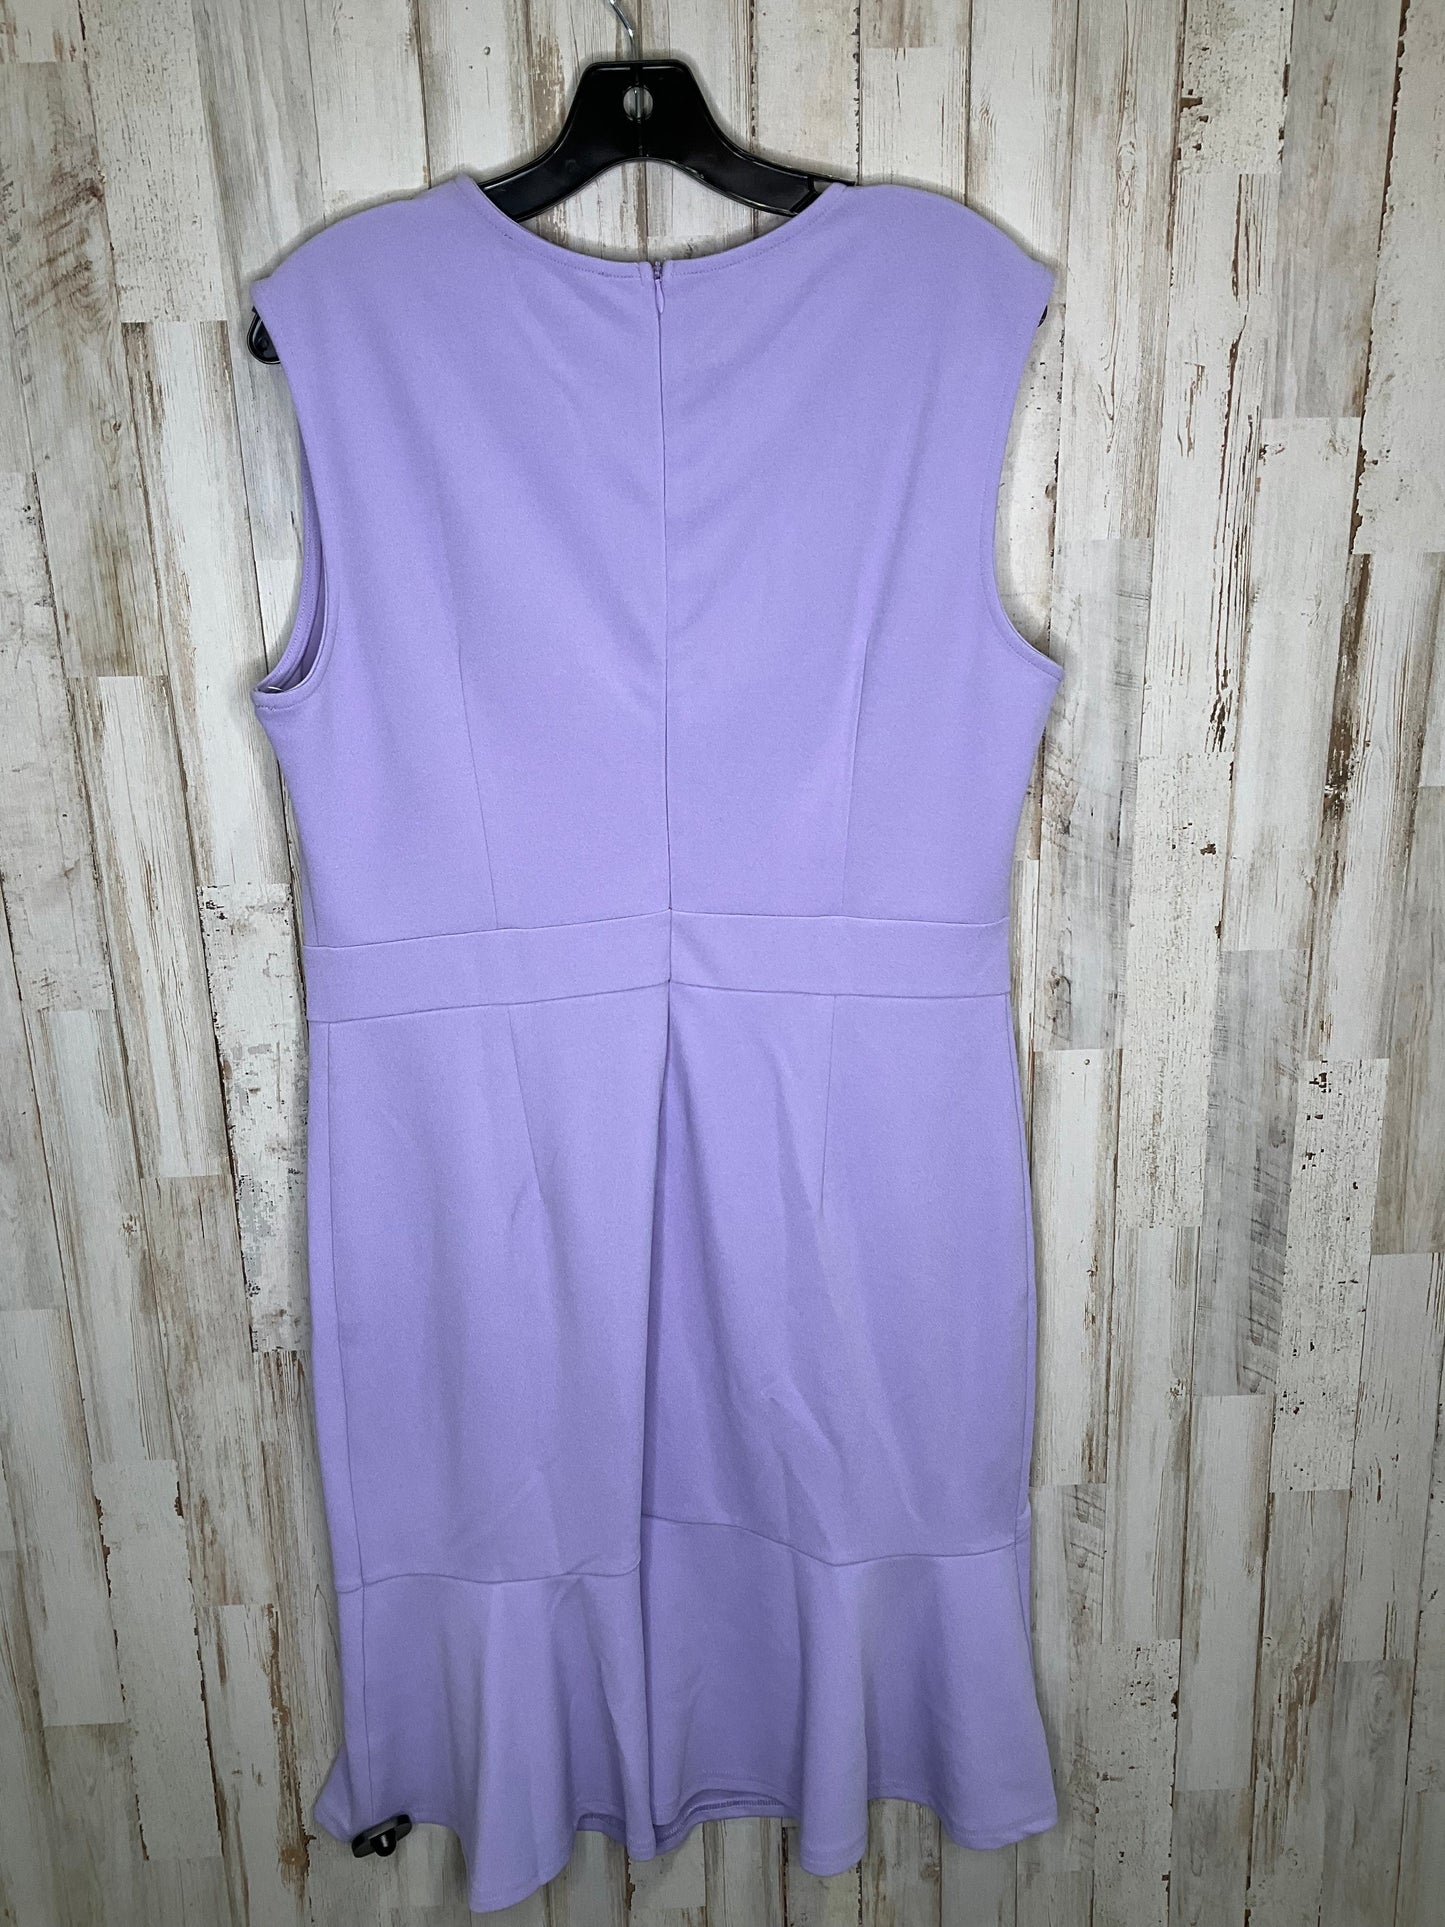 Dress Party Midi By Clothes Mentor  Size: 1x